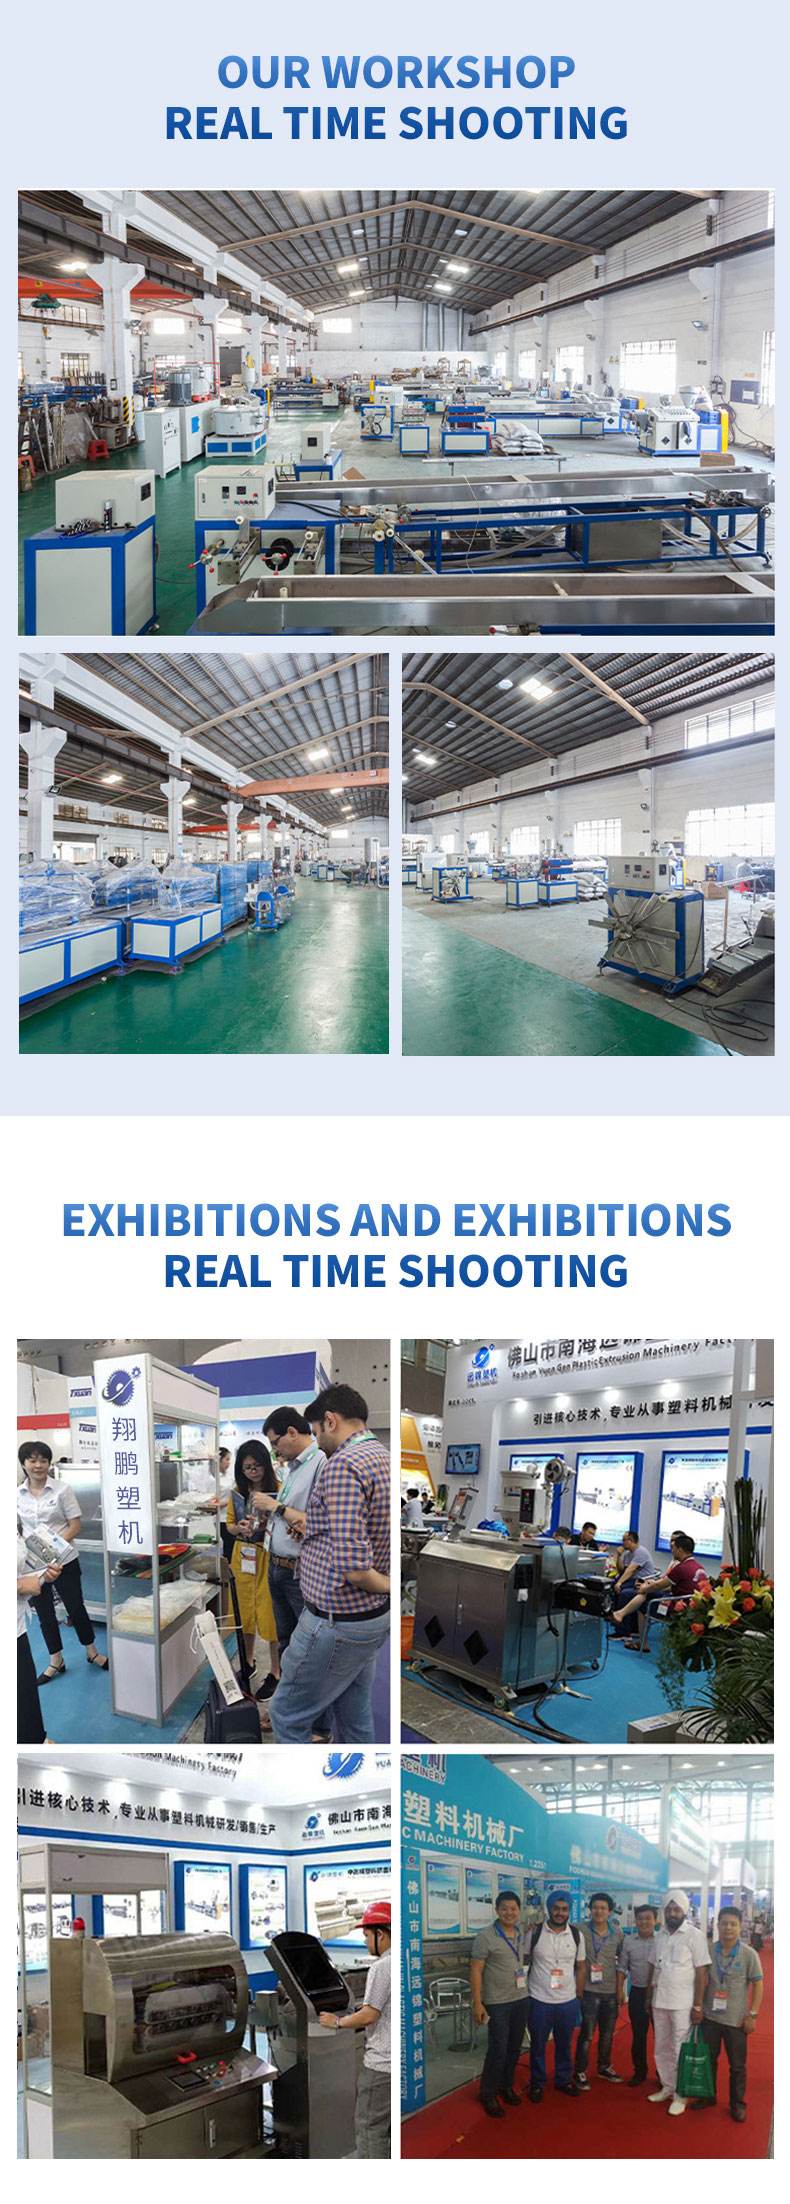 Medical tube production equipment PVC medical tube extruder Xiangpeng Machinery